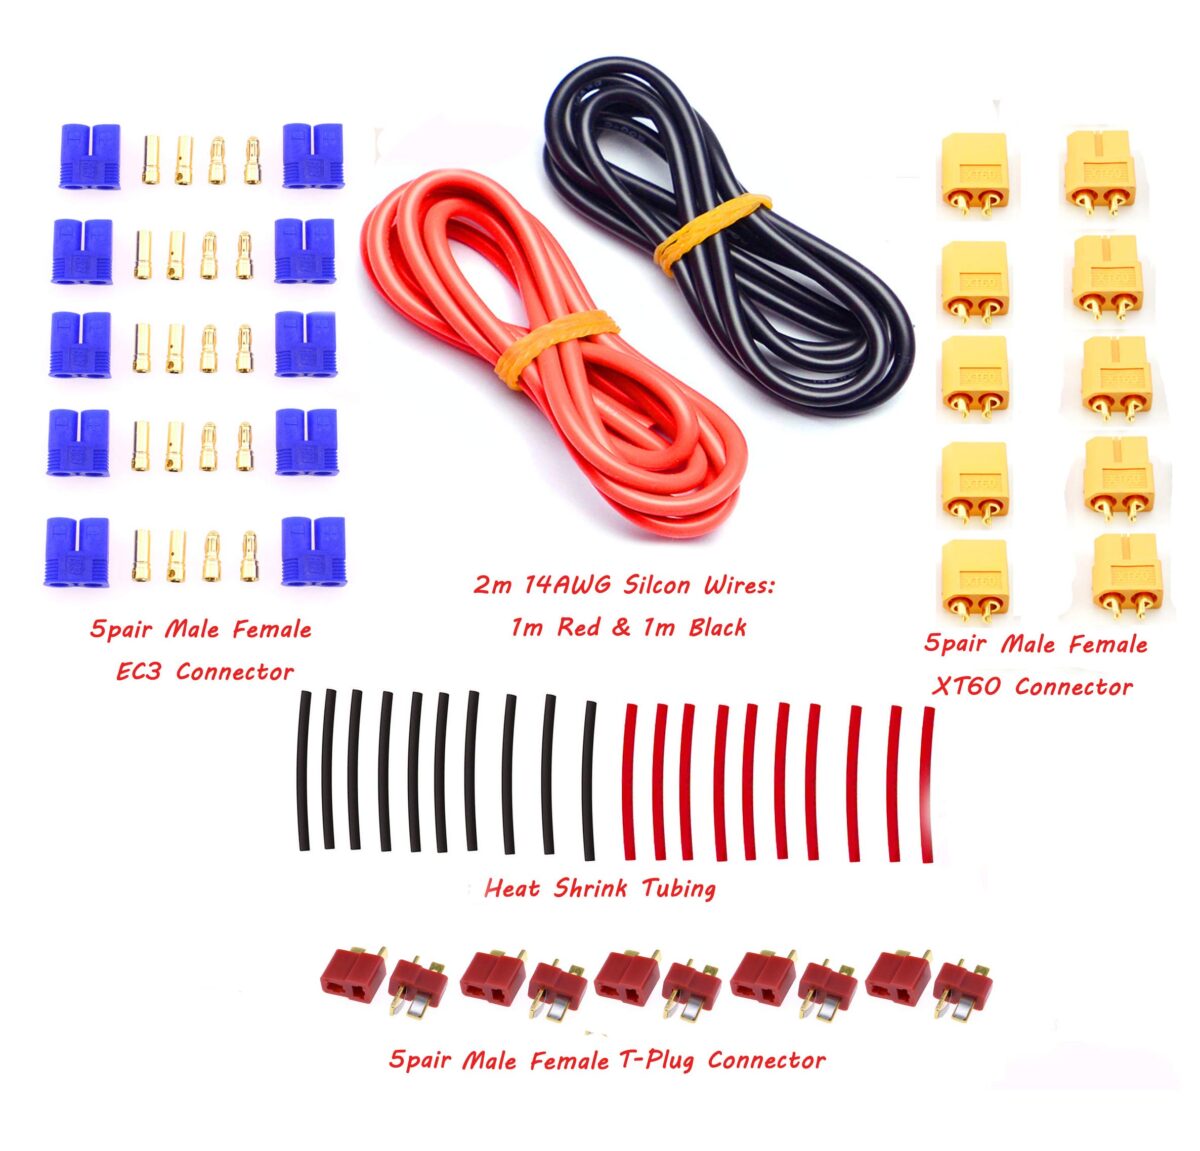 T-Plug EC3 XT60 Male and Female Adapter Connector with Silicone Wire and Heat Shrink Tubes for RC ESC Lipo Battery Motor(52PCS)